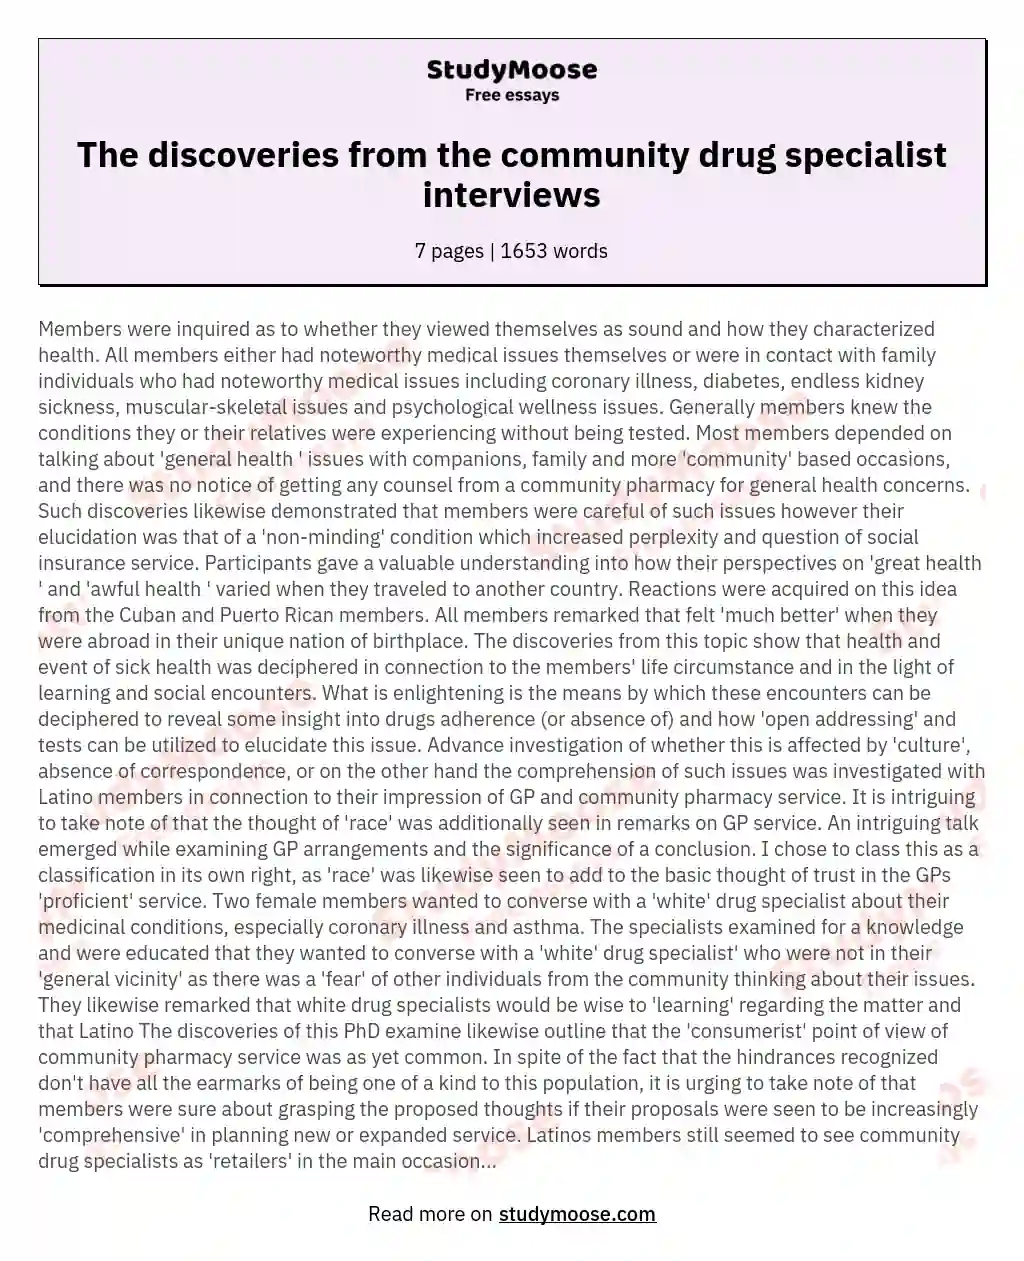 The discoveries from the community drug specialist interviews essay